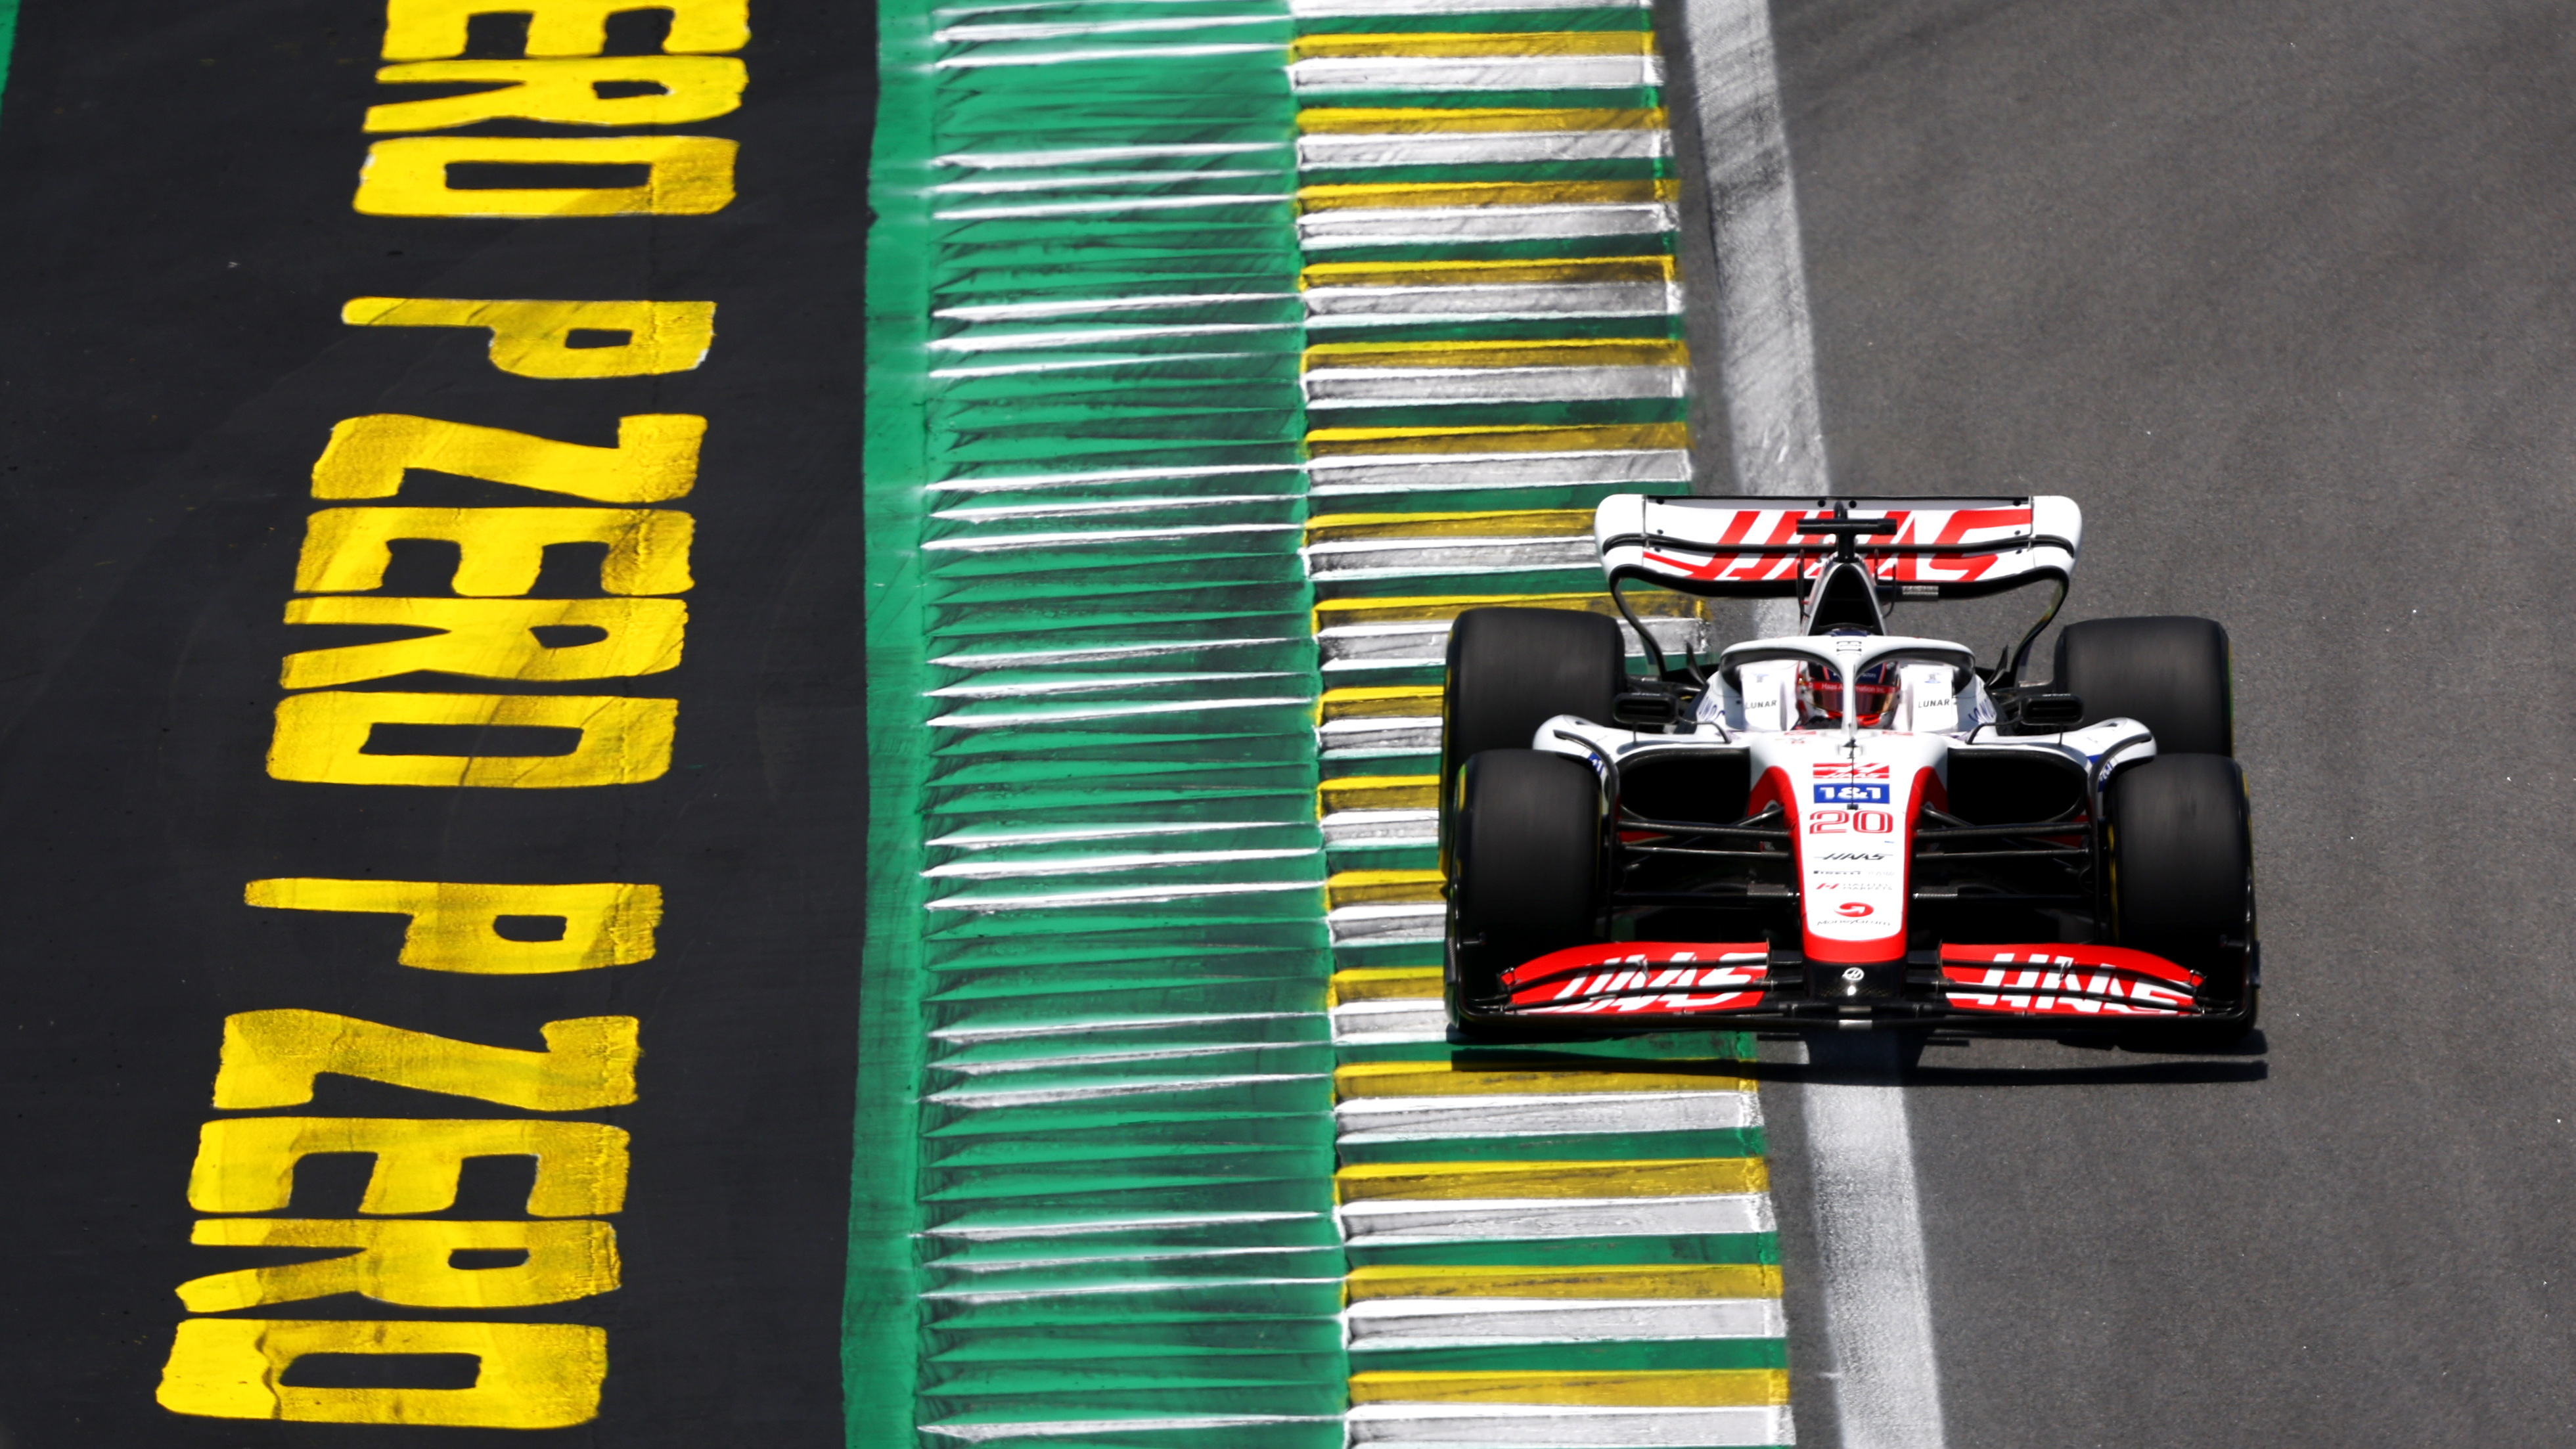 Brazilian Grand Prix live stream how to watch F1 free online from anywhere today